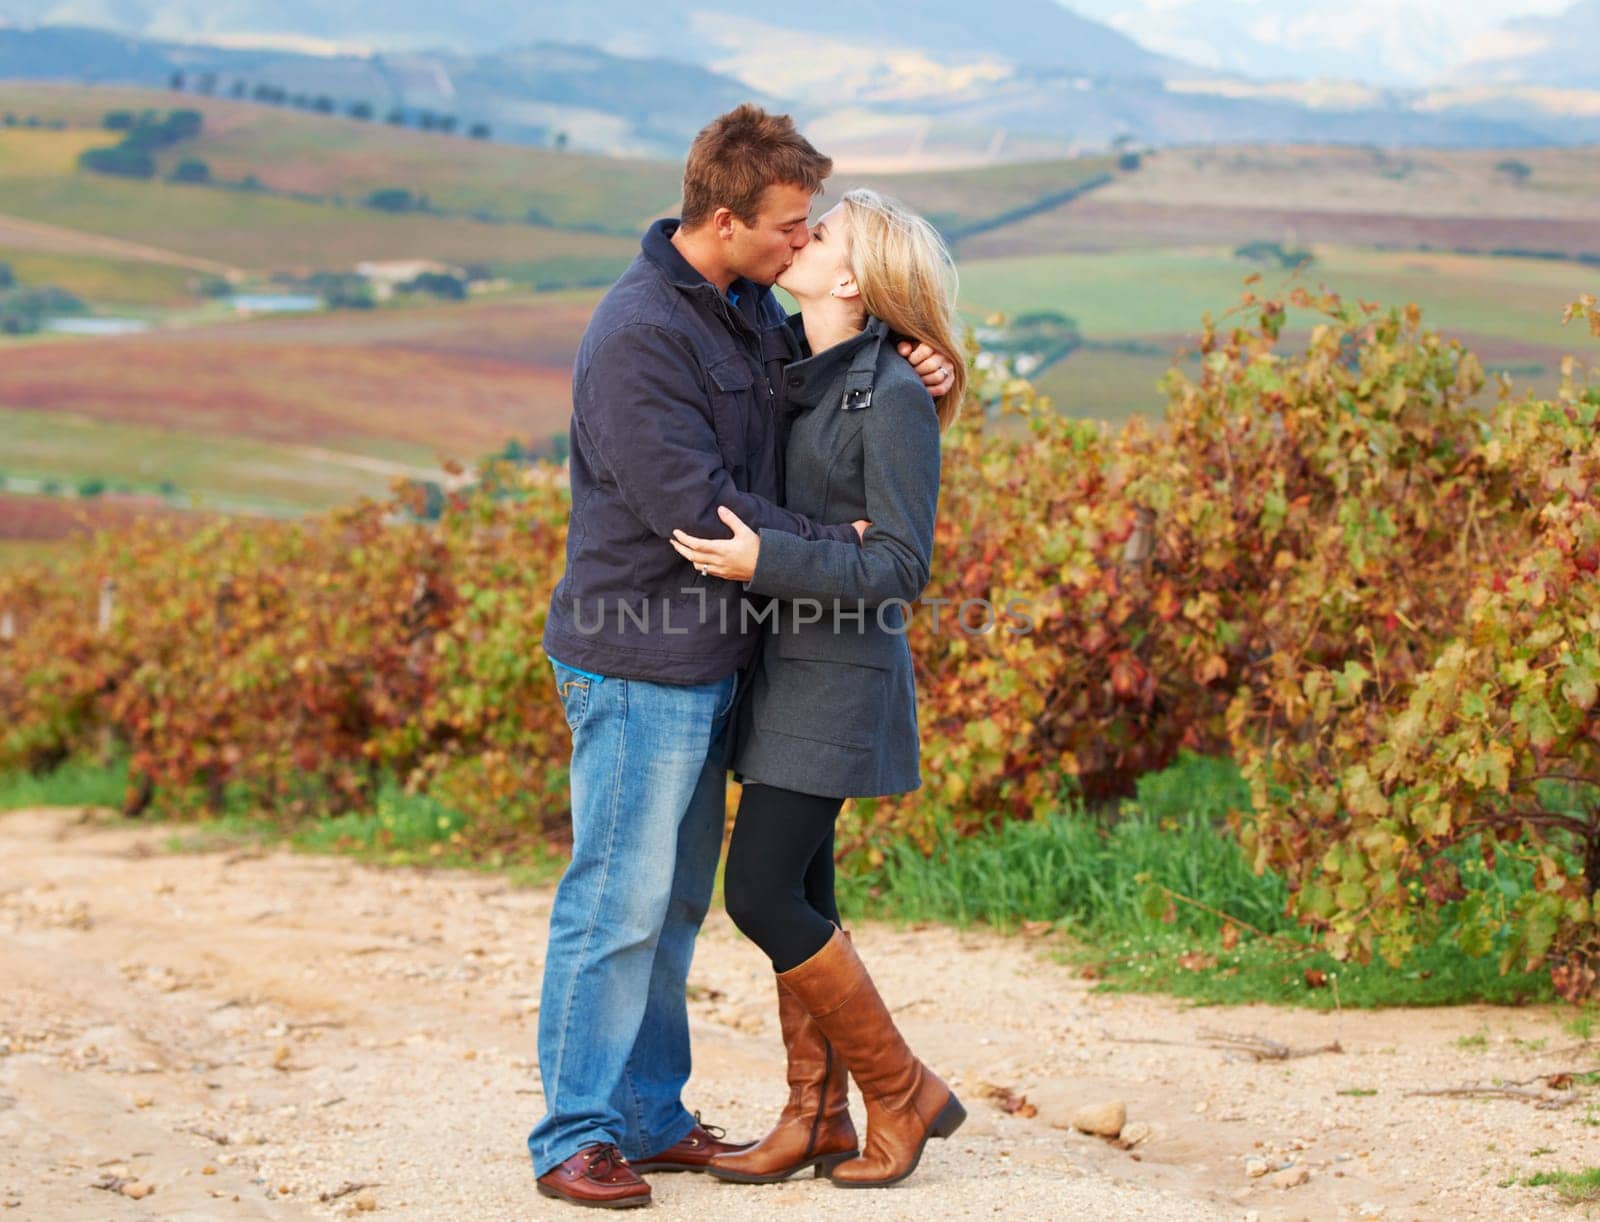 Love, romance and couple kissing in a vineyard outdoor while on a date in celebration of their relationship. Romantic, dating or kiss with a man and woman on a farm for agriculture or sustainability by YuriArcurs